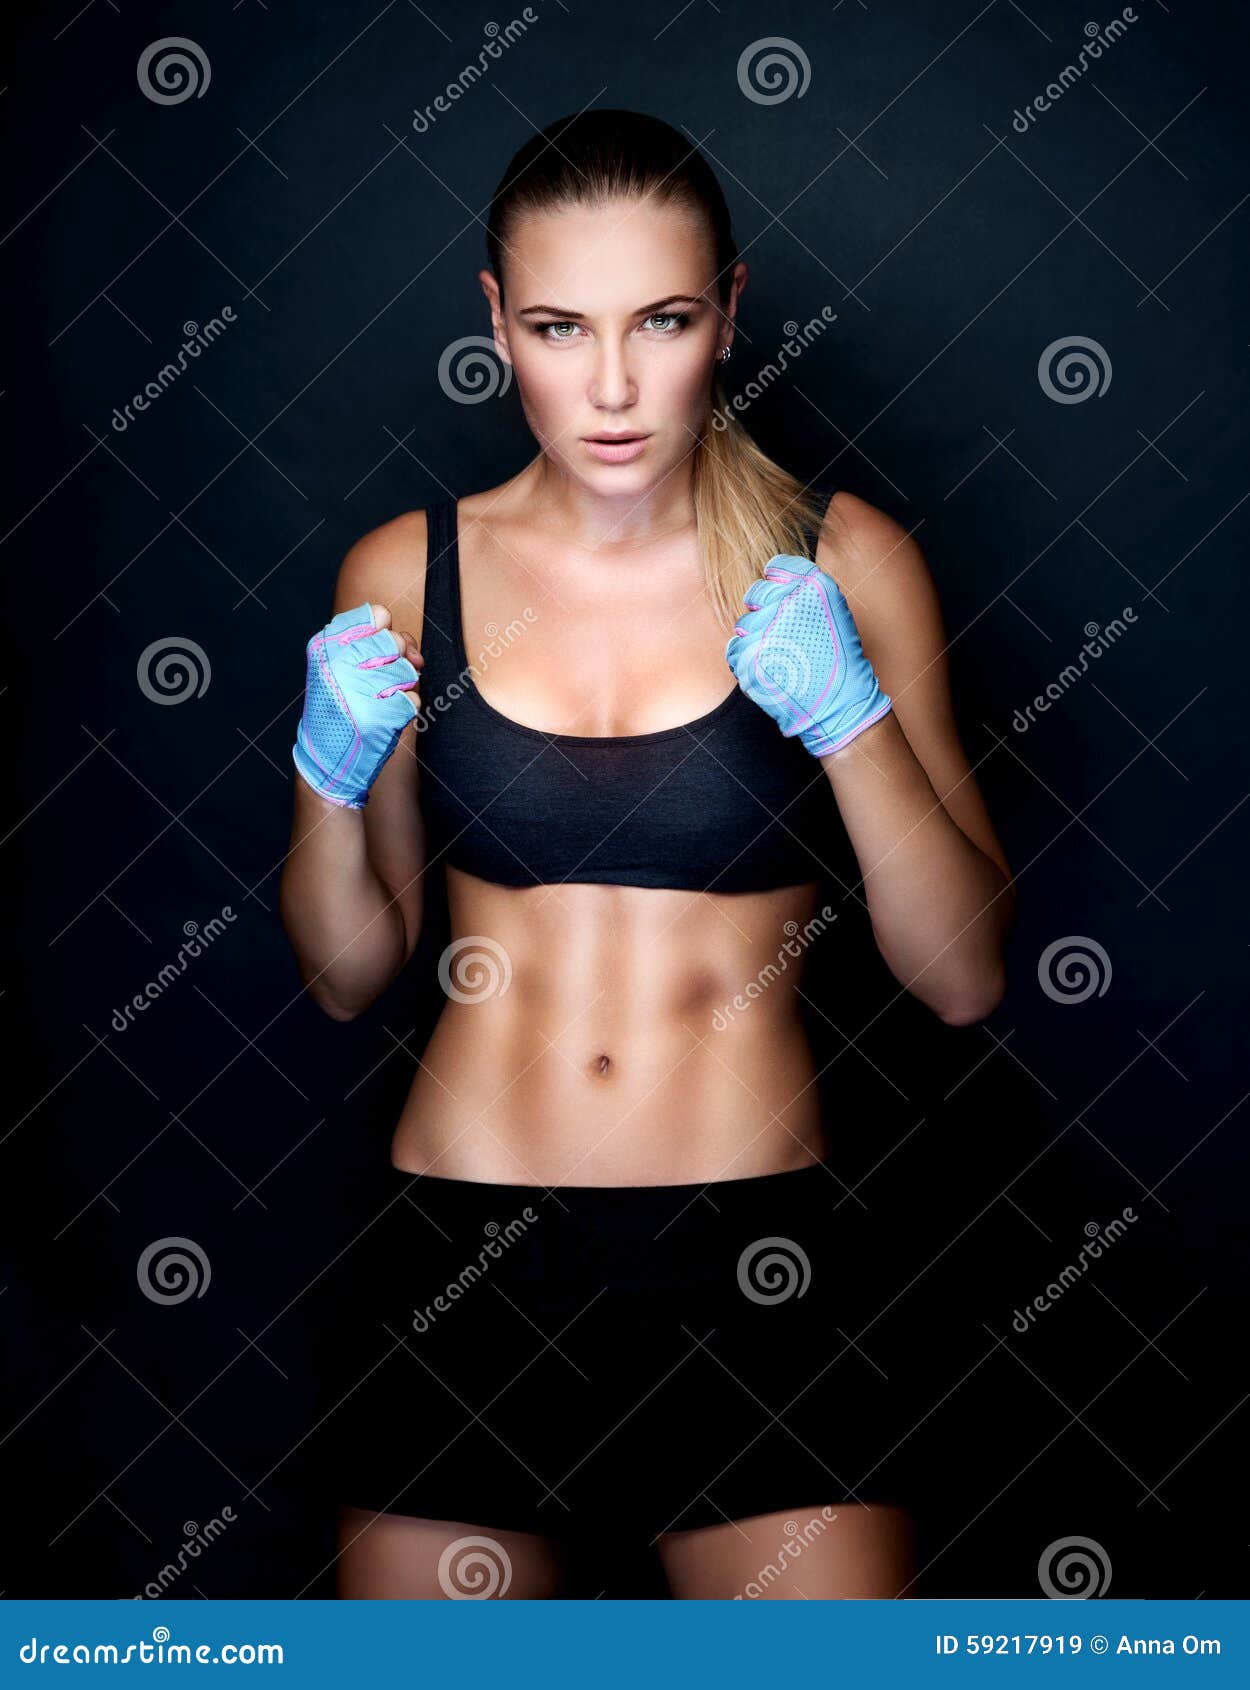 1,018,737 Athletic Female Body Images, Stock Photos, 3D objects